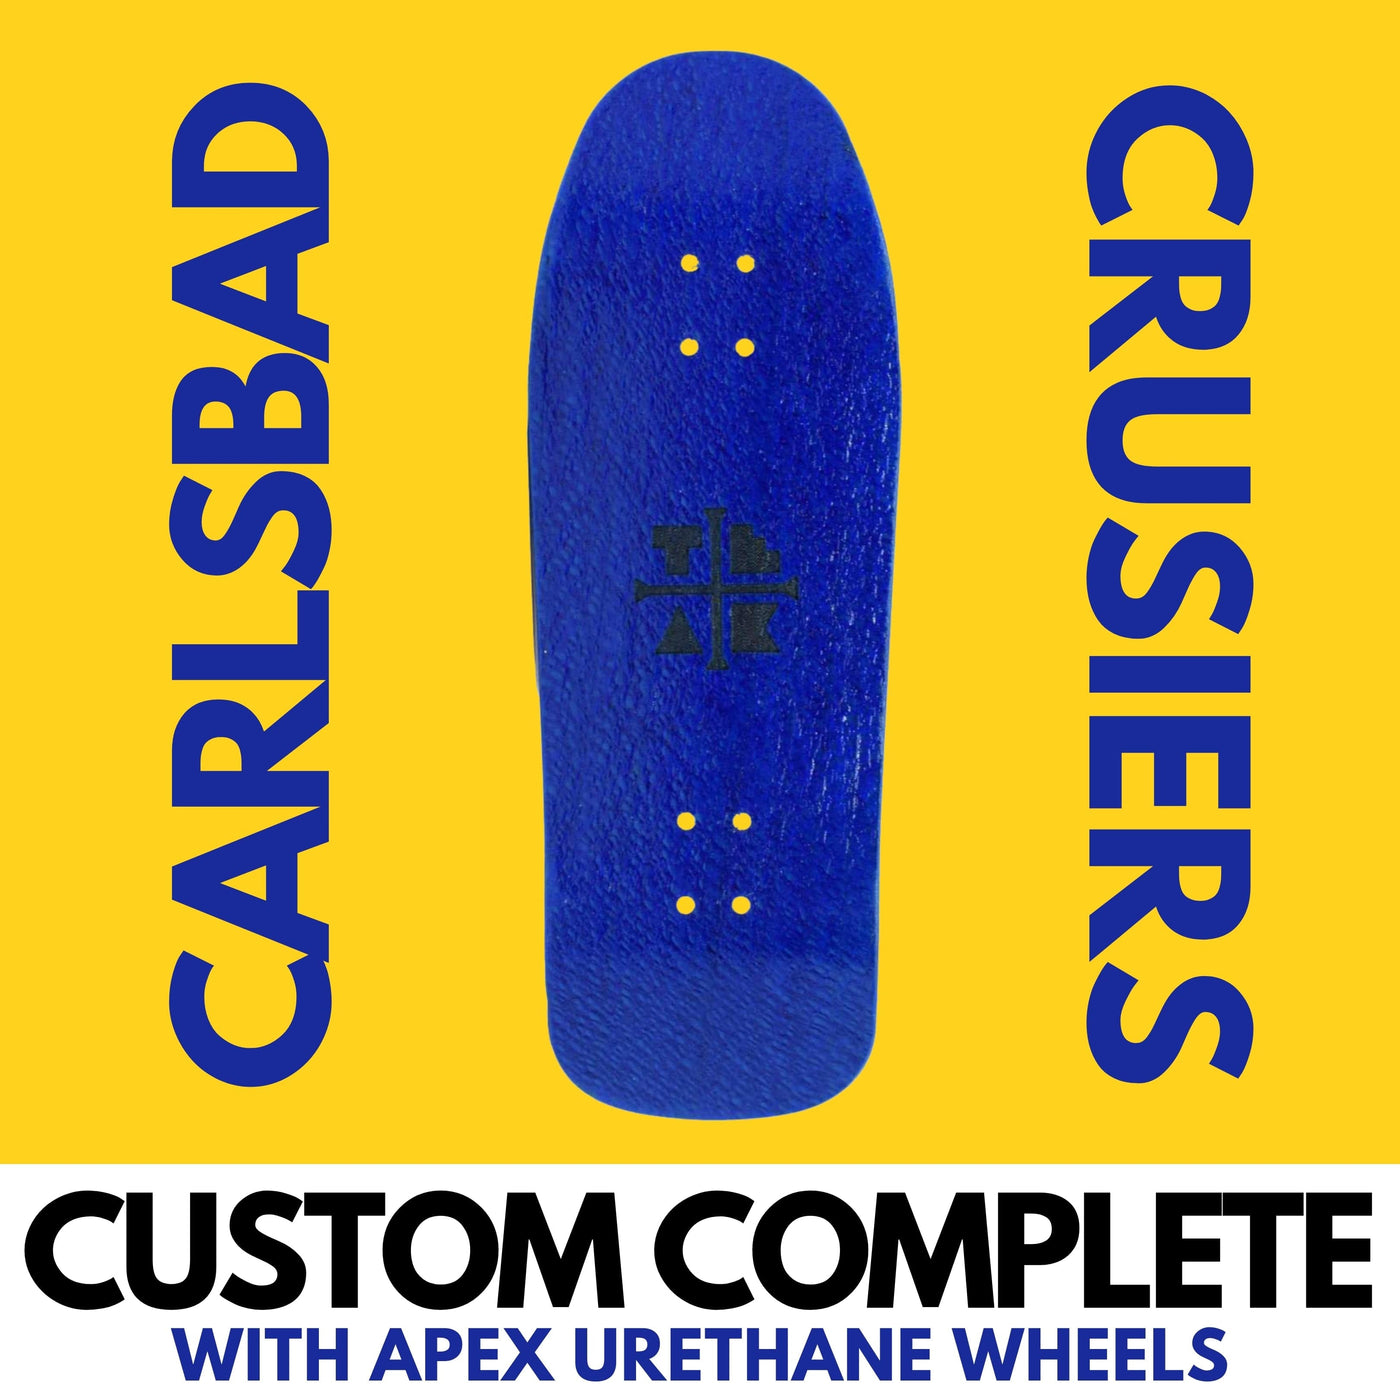 related_to_7973002903805 Custom Test Carlsbad Bundle - Customer's Product with price 0.00 ID gIGdPnLMSGEtyKp65hiE67zY